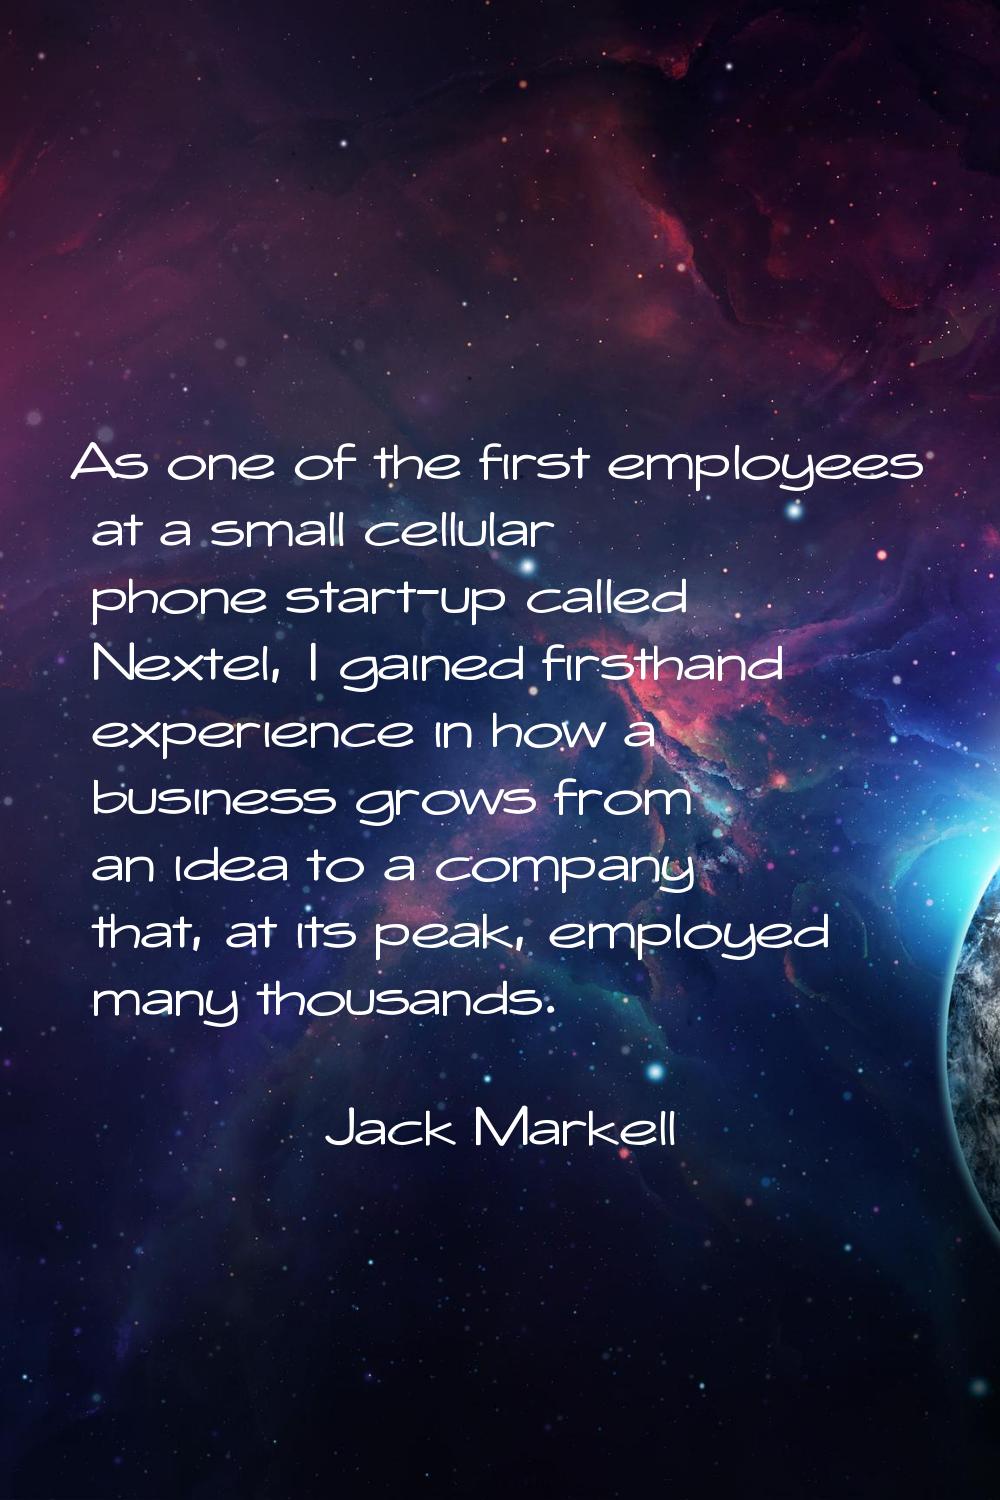 As one of the first employees at a small cellular phone start-up called Nextel, I gained firsthand 